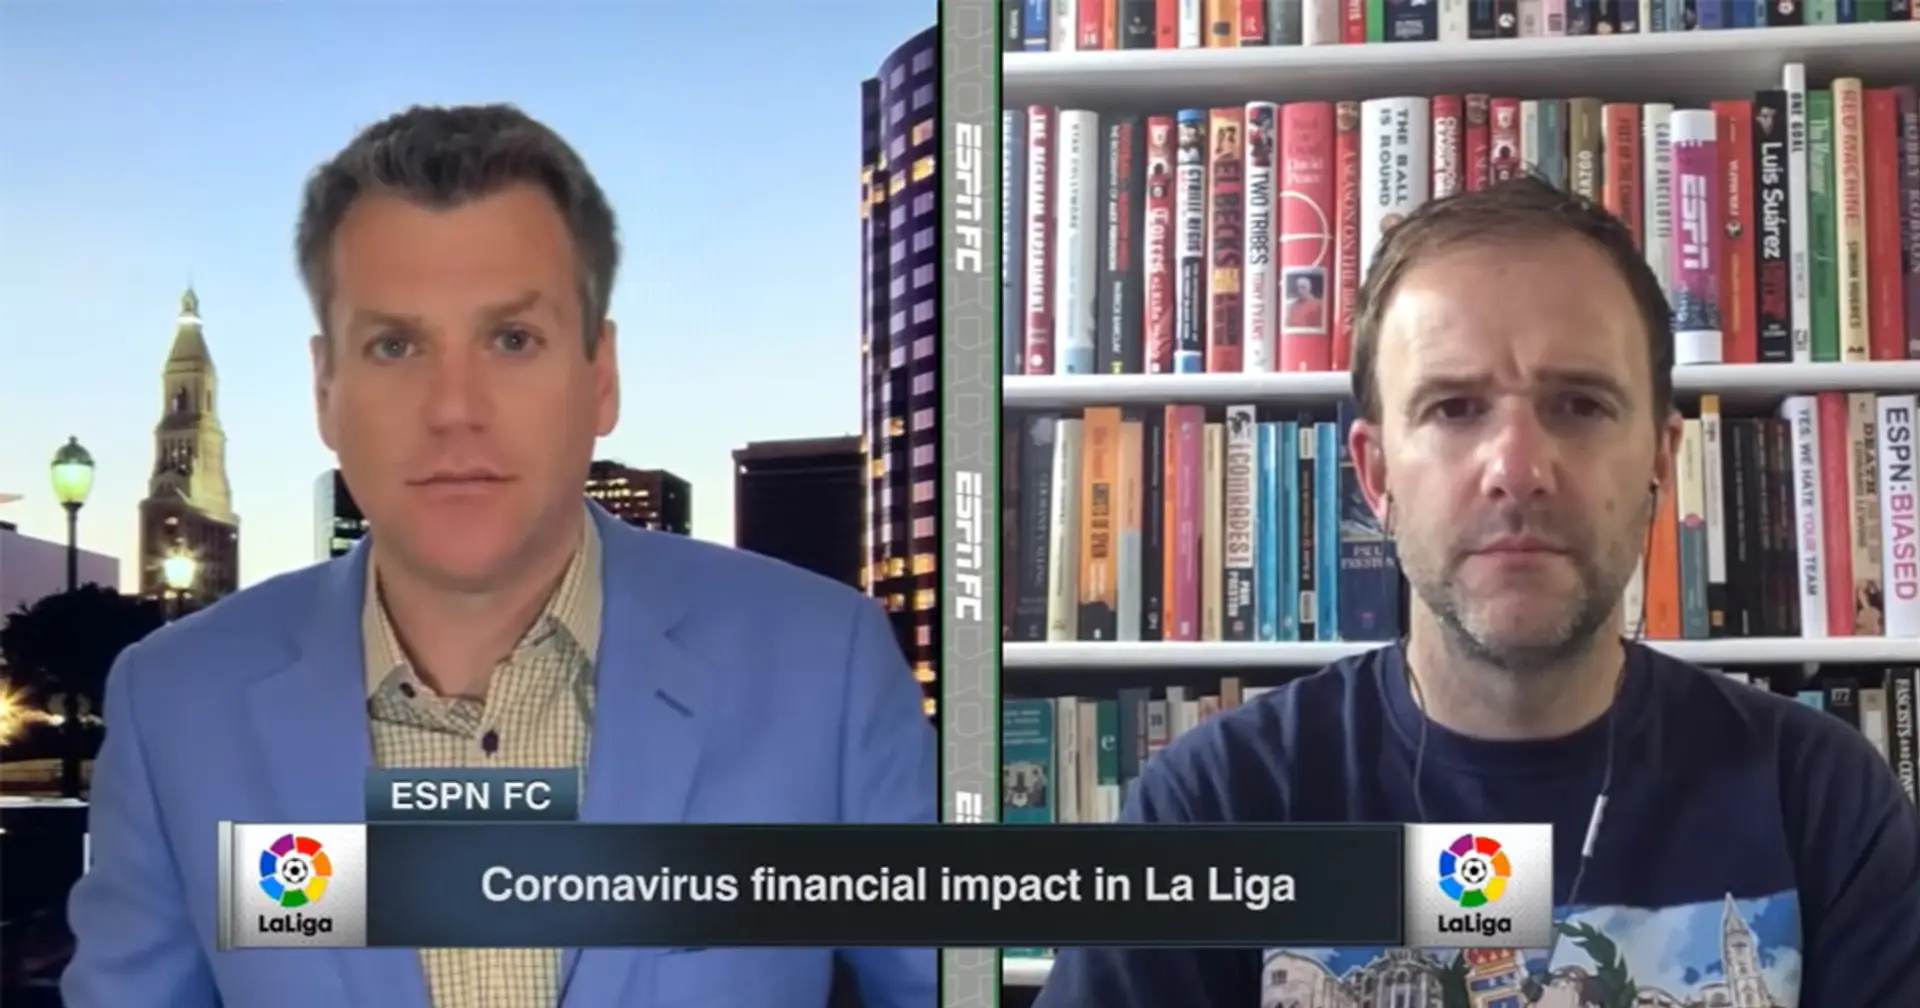 Pogba, Mbappe, Haaland - will Madrid be able to spend big this summer amid coronavirus crisis? (video)